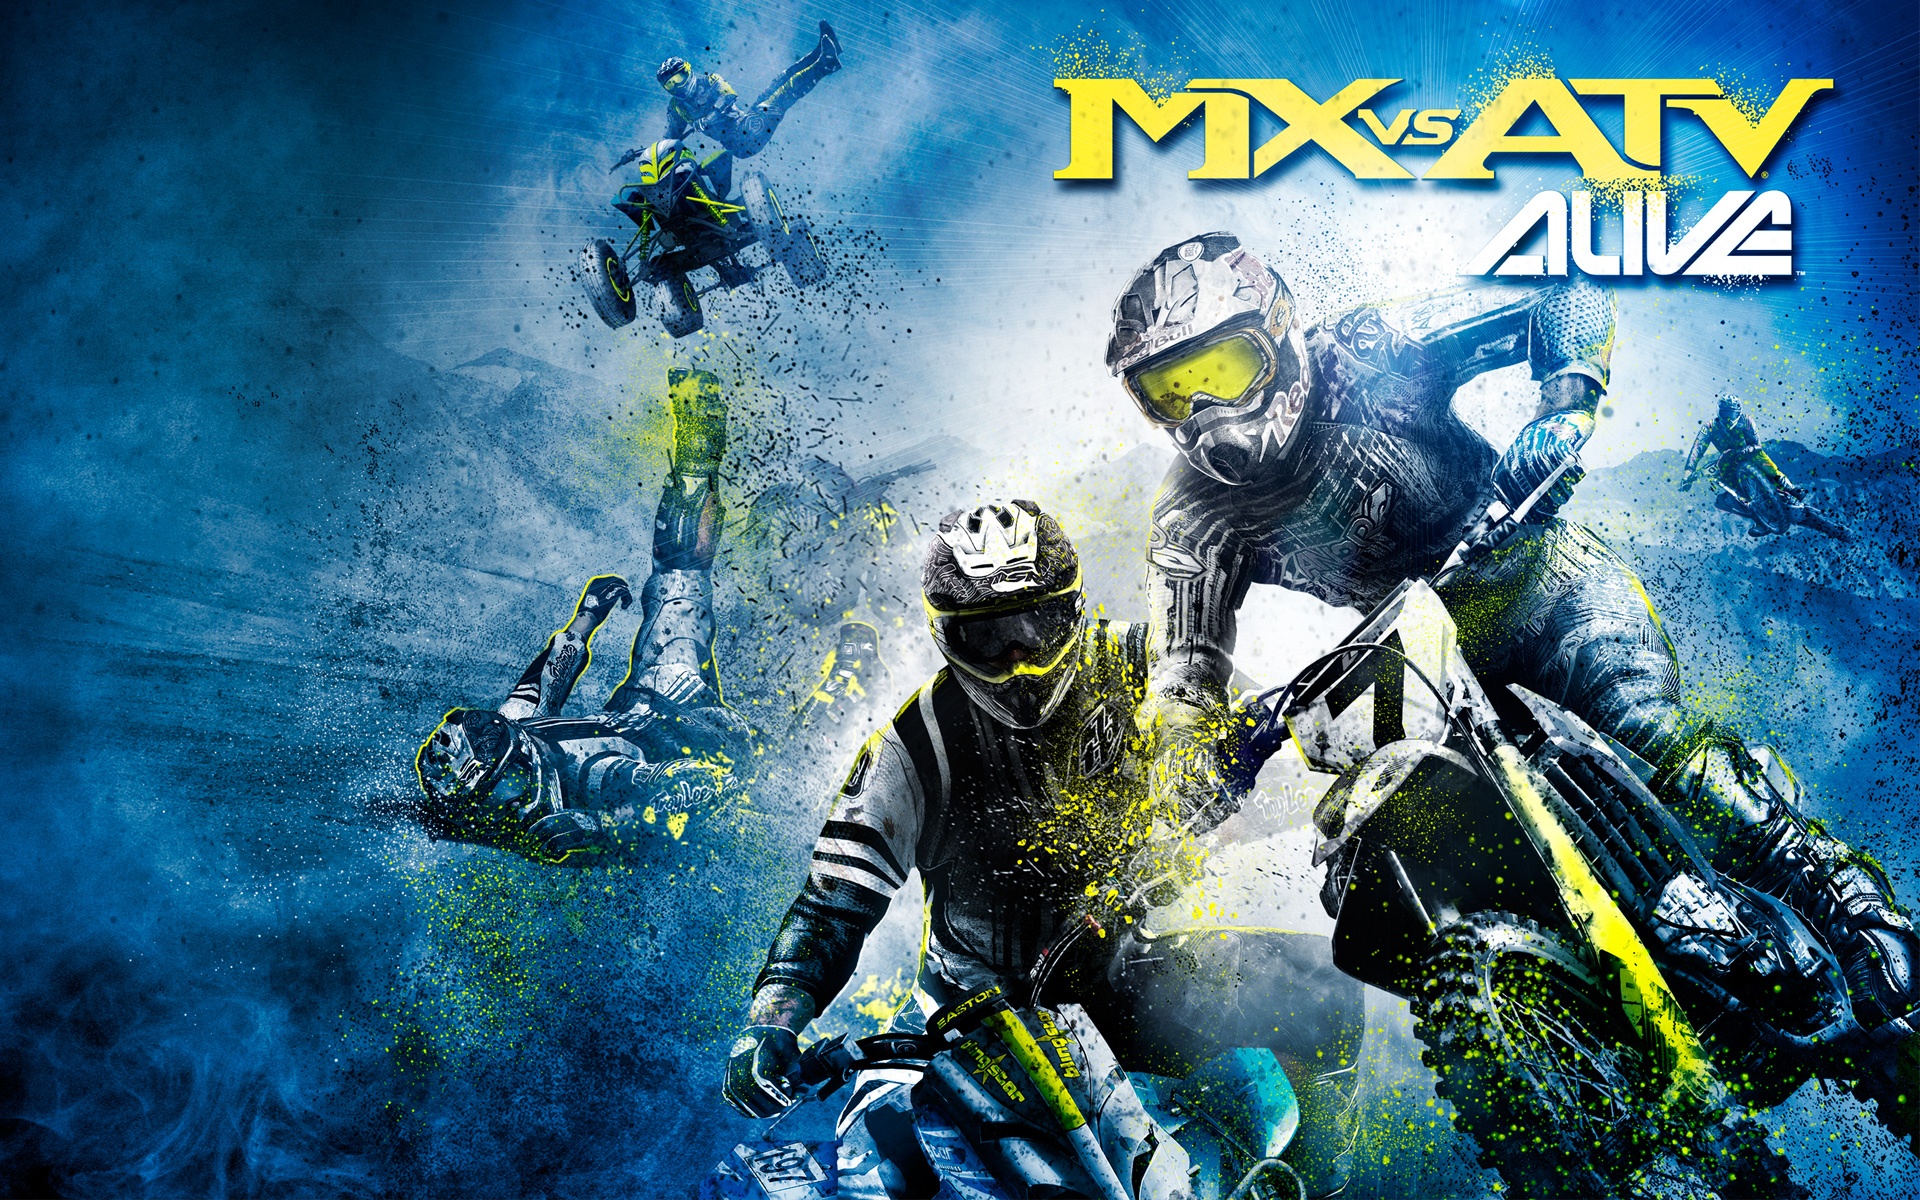 Mx Vs Atv Alive Is An Off Road Racing Game Hd Wallpaper Background Image 19x10 Id Wallpaper Abyss